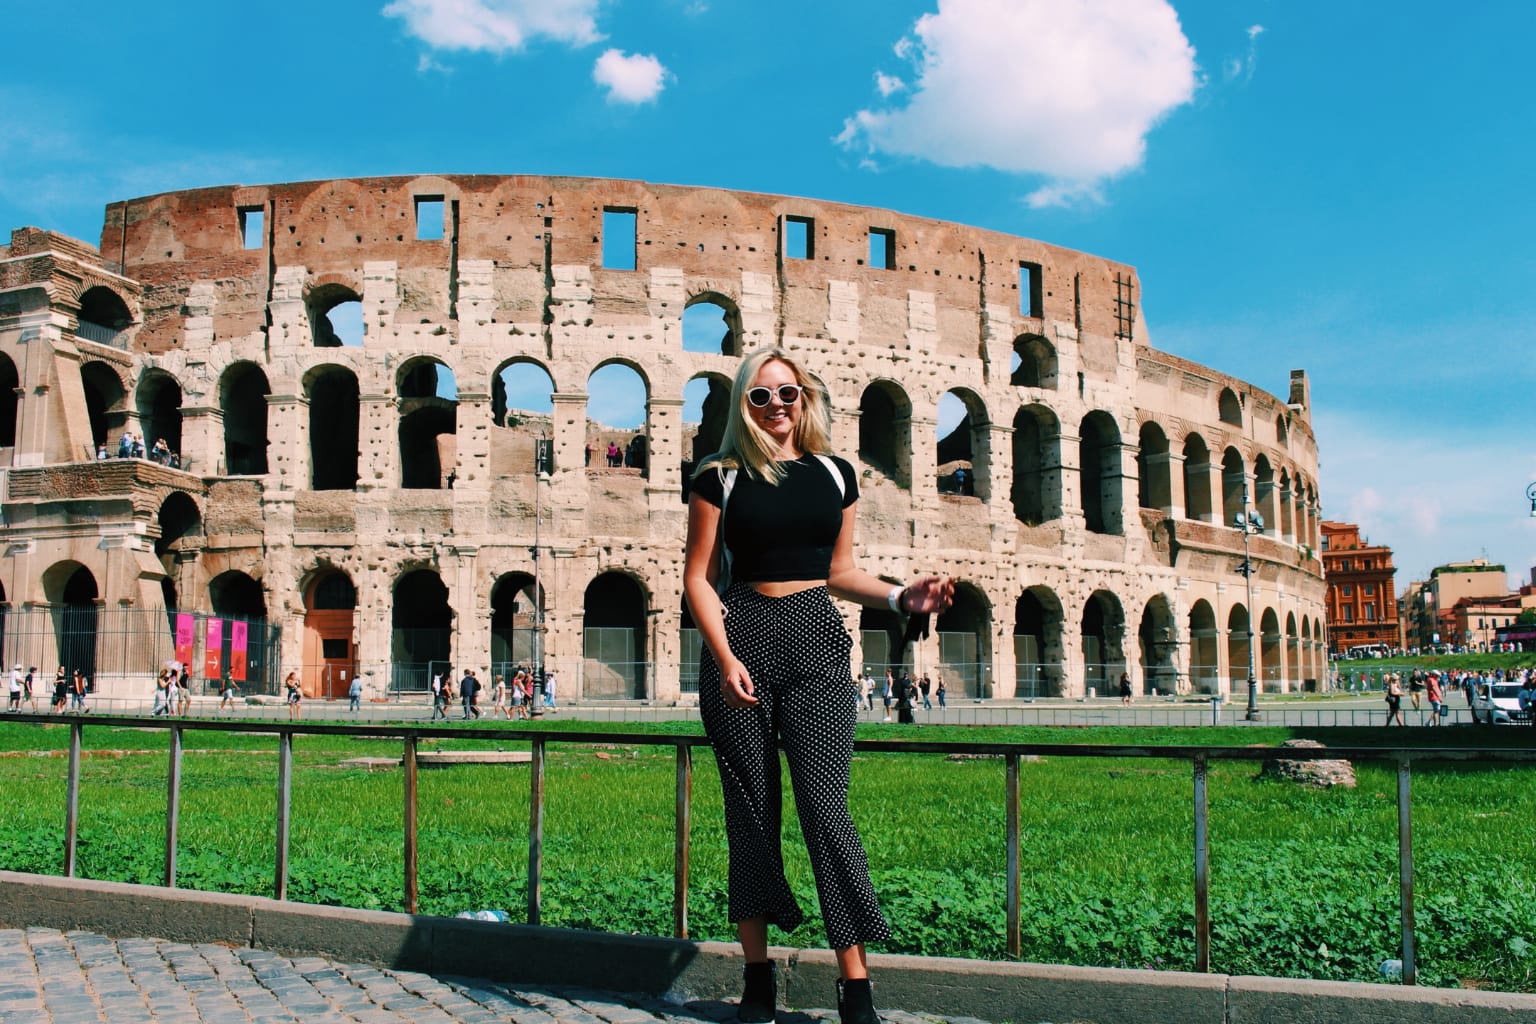 A student posing in front of the Colosseum in Rome, Italy.